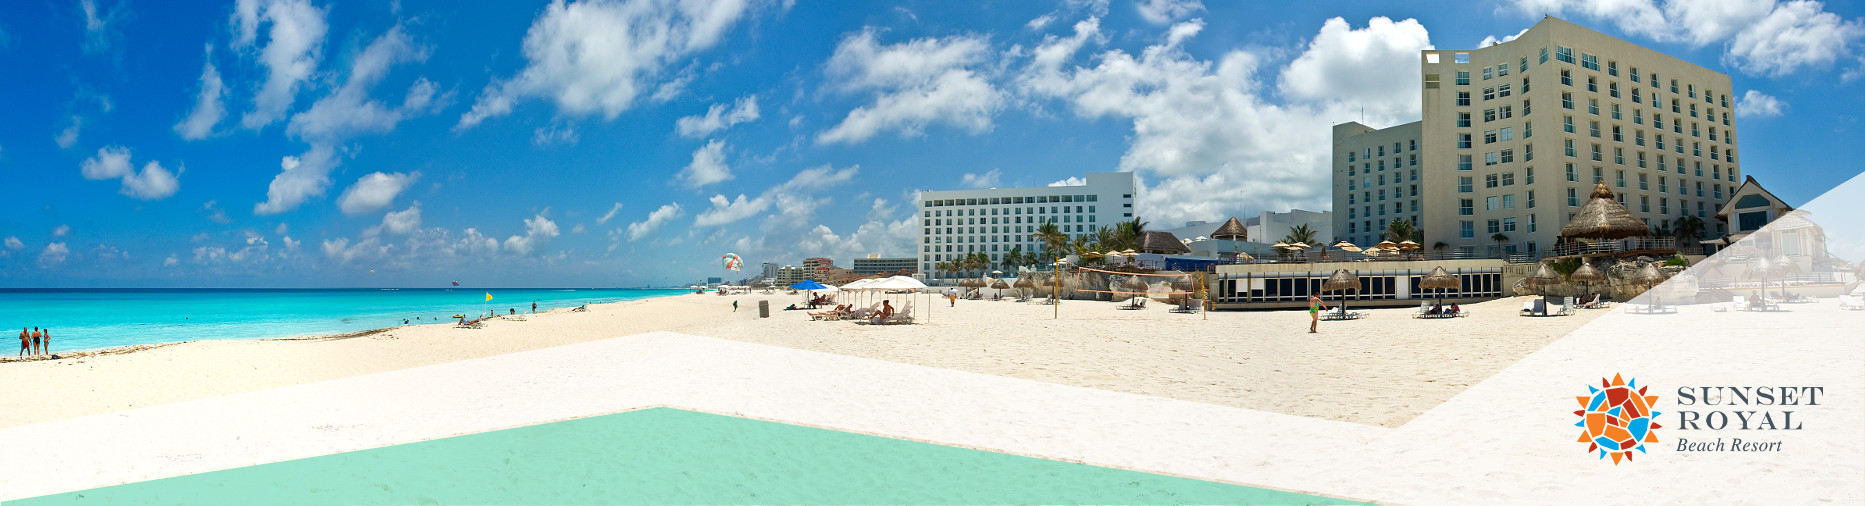 5 days / 4 nights, All-Inclusive at the Sunset Royal in Cancun